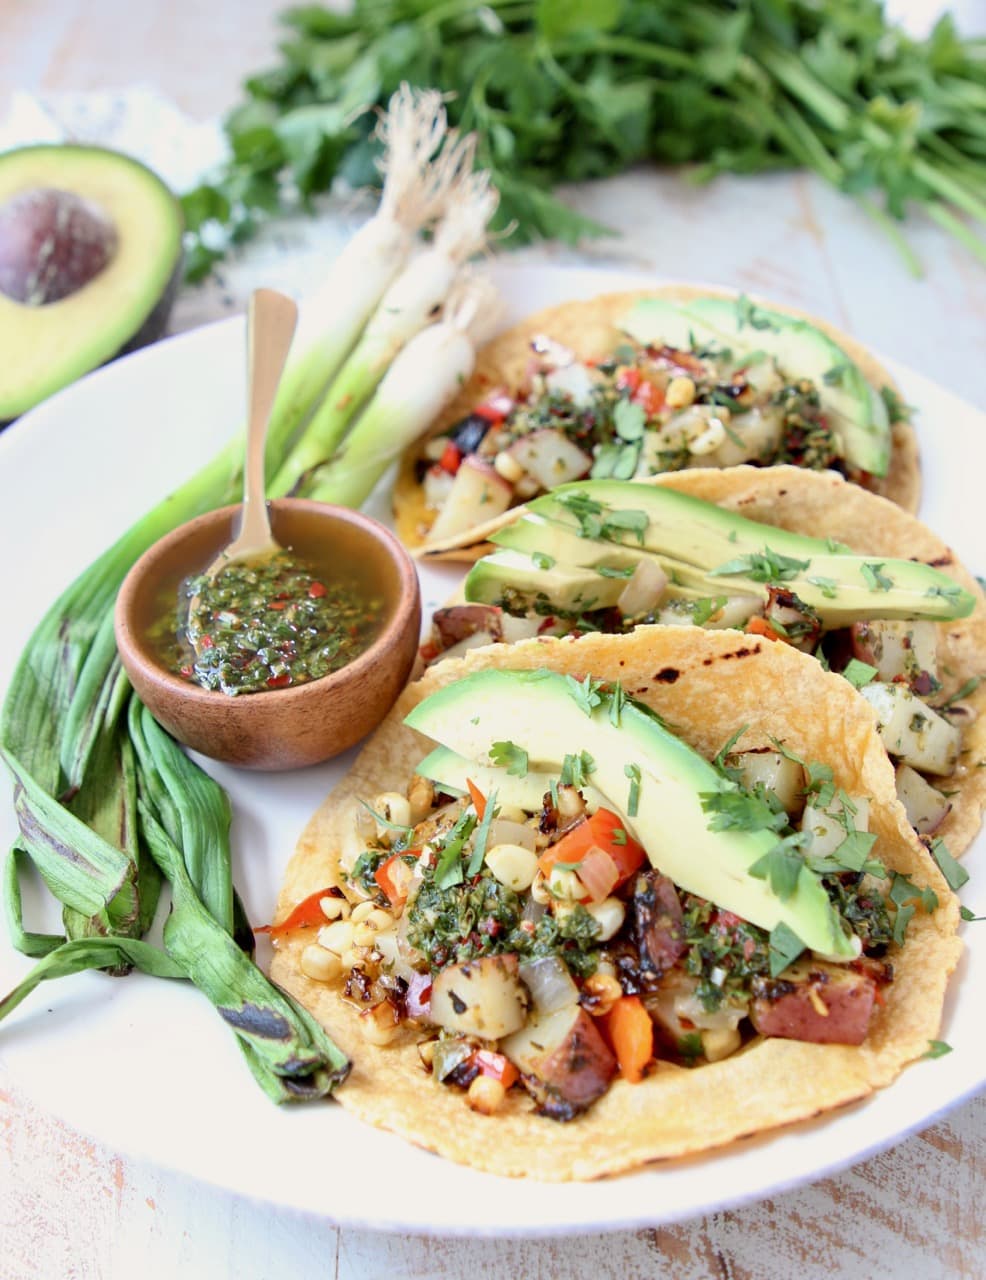 Grilled Vegan Tacos with Potatoes, Peppers, Avocado and Chimichurri Sauce